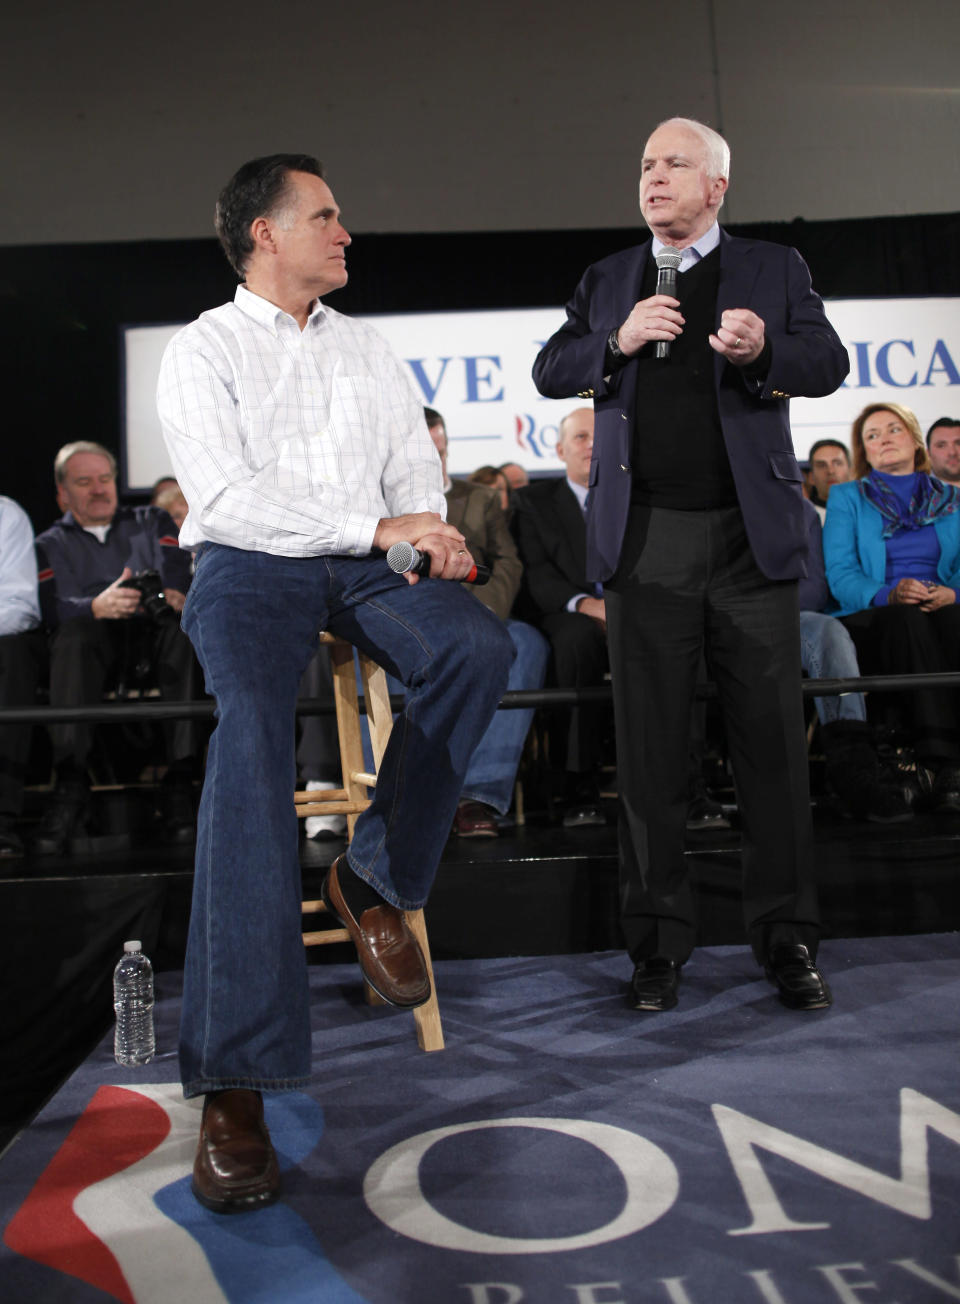 Pols in bad jeans